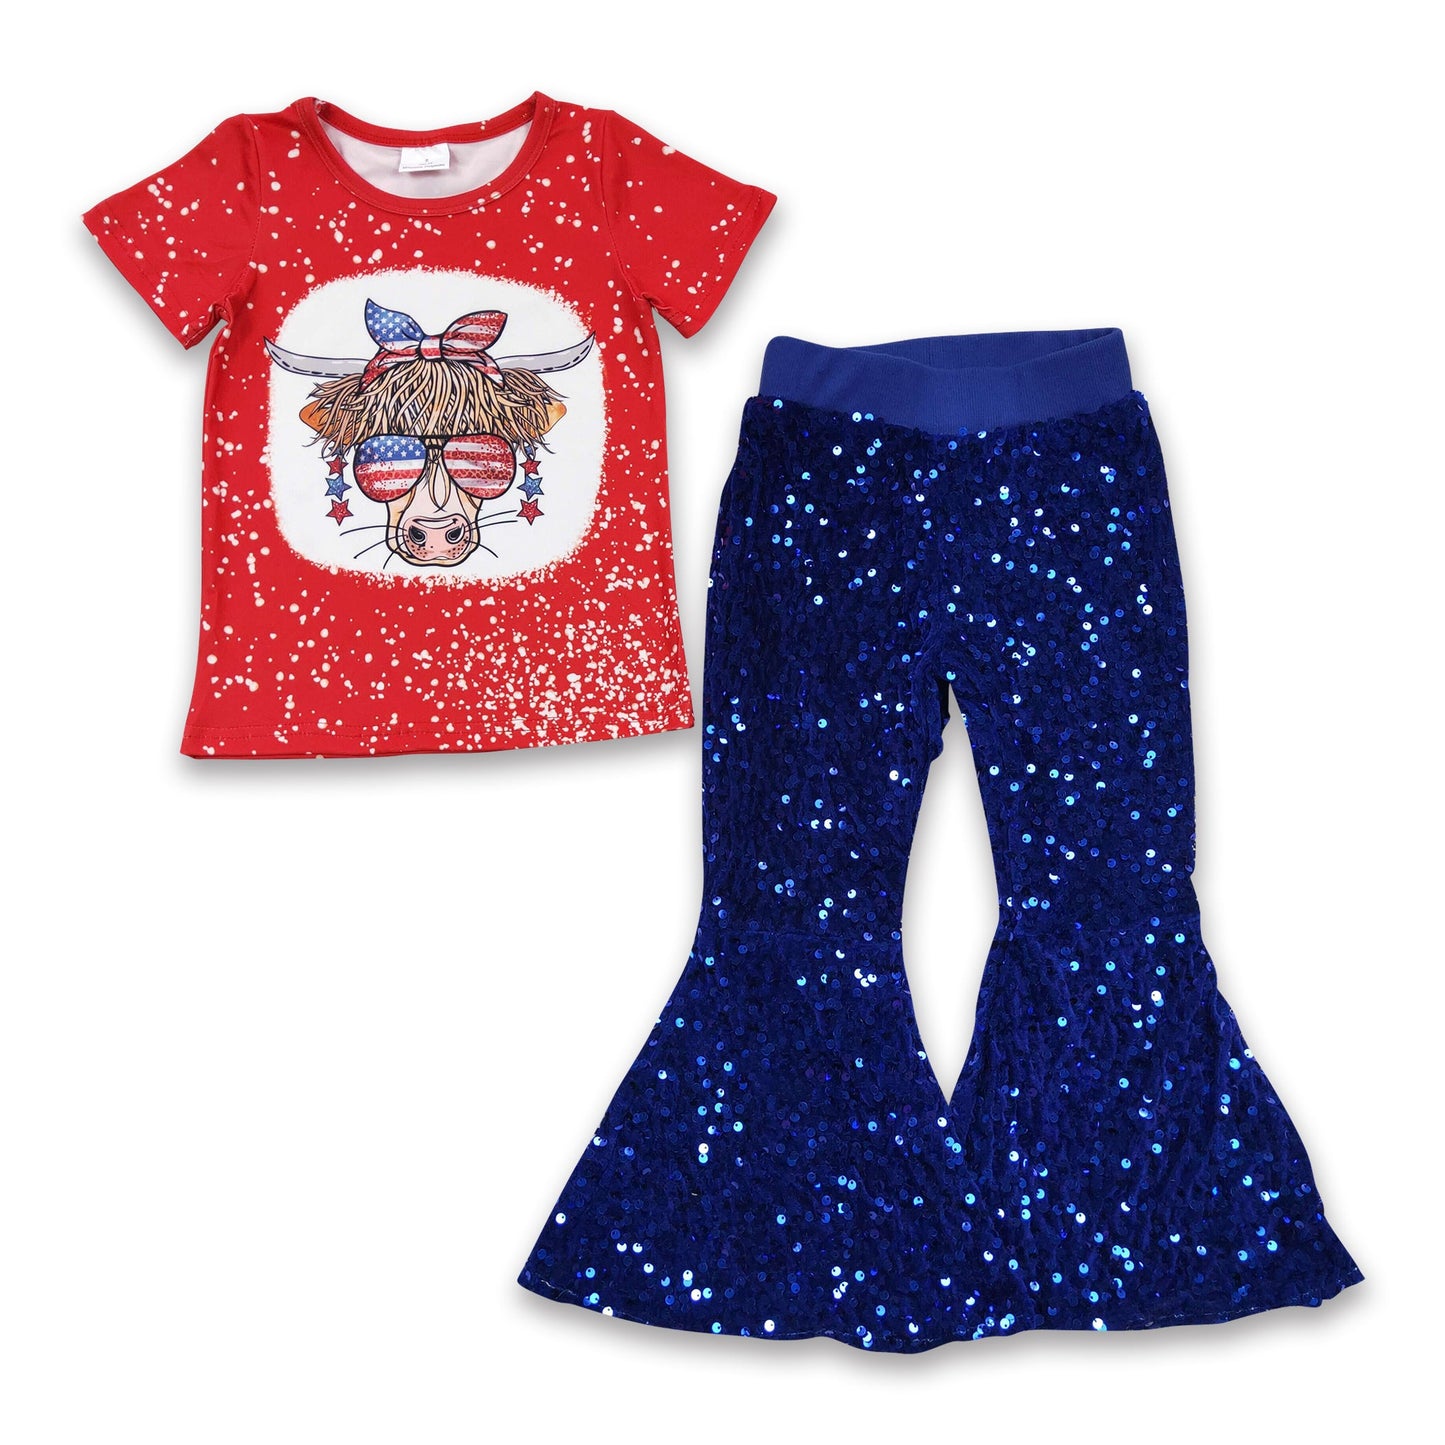 Highland cow glasses shirt blue sequin girls 4th of july outfits